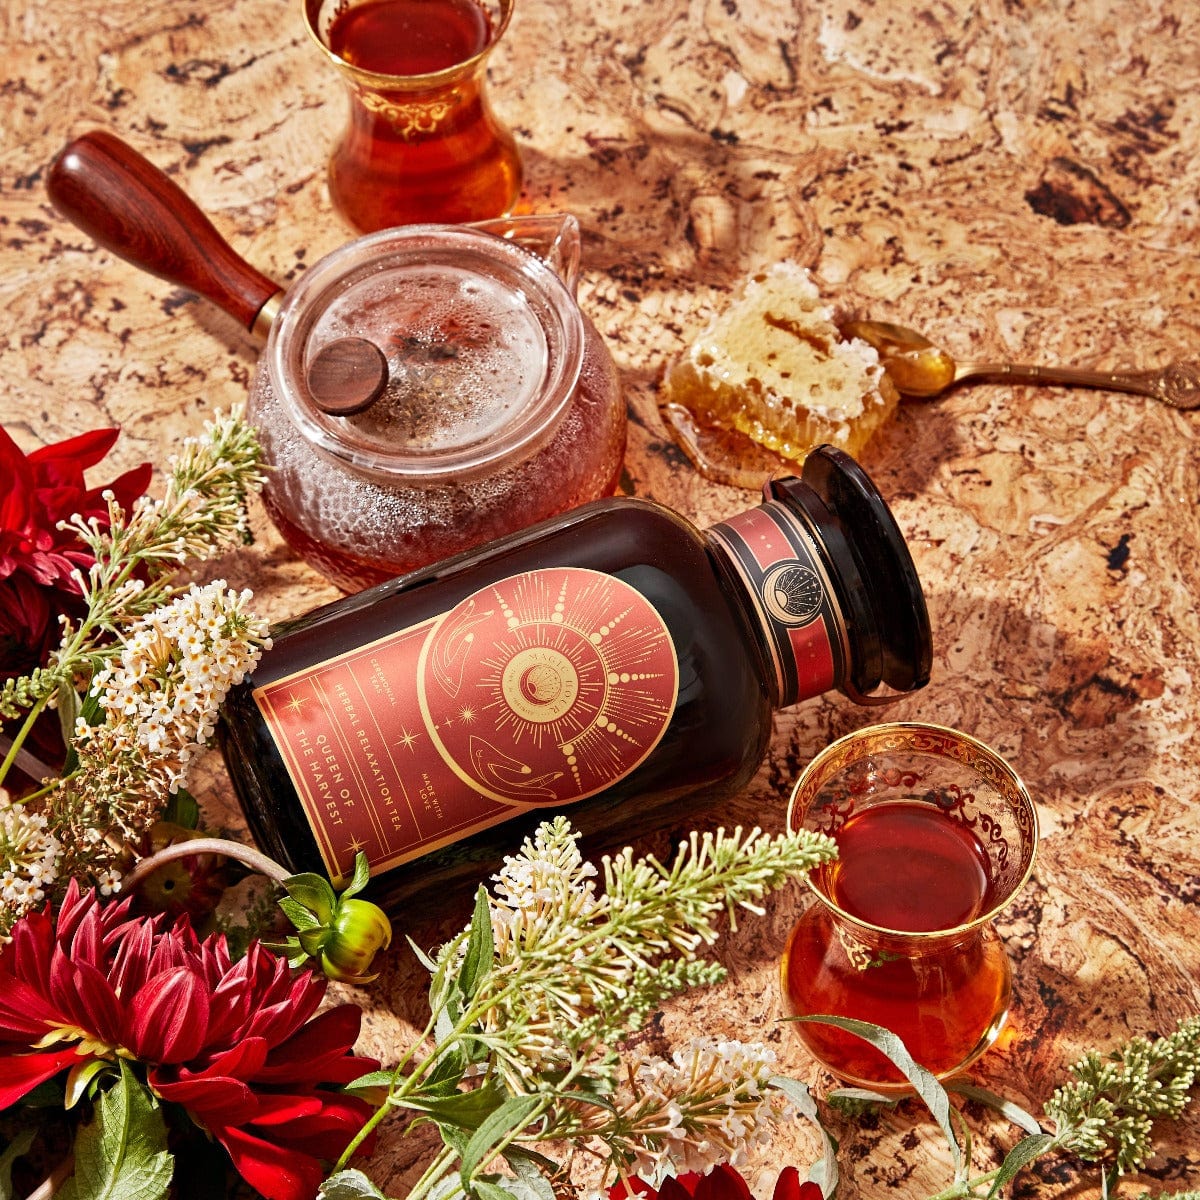 A box of Magic Hour's Queen of the Harvest: Herbal Relaxation Tea is surrounded by a glass teapot filled with organic tea, a honeycomb with a golden spoon, two traditional tea glasses brimming with loose leaf tea, red and white flowers, and greenery on a speckled countertop. The scene exudes a cozy and inviting atmosphere.